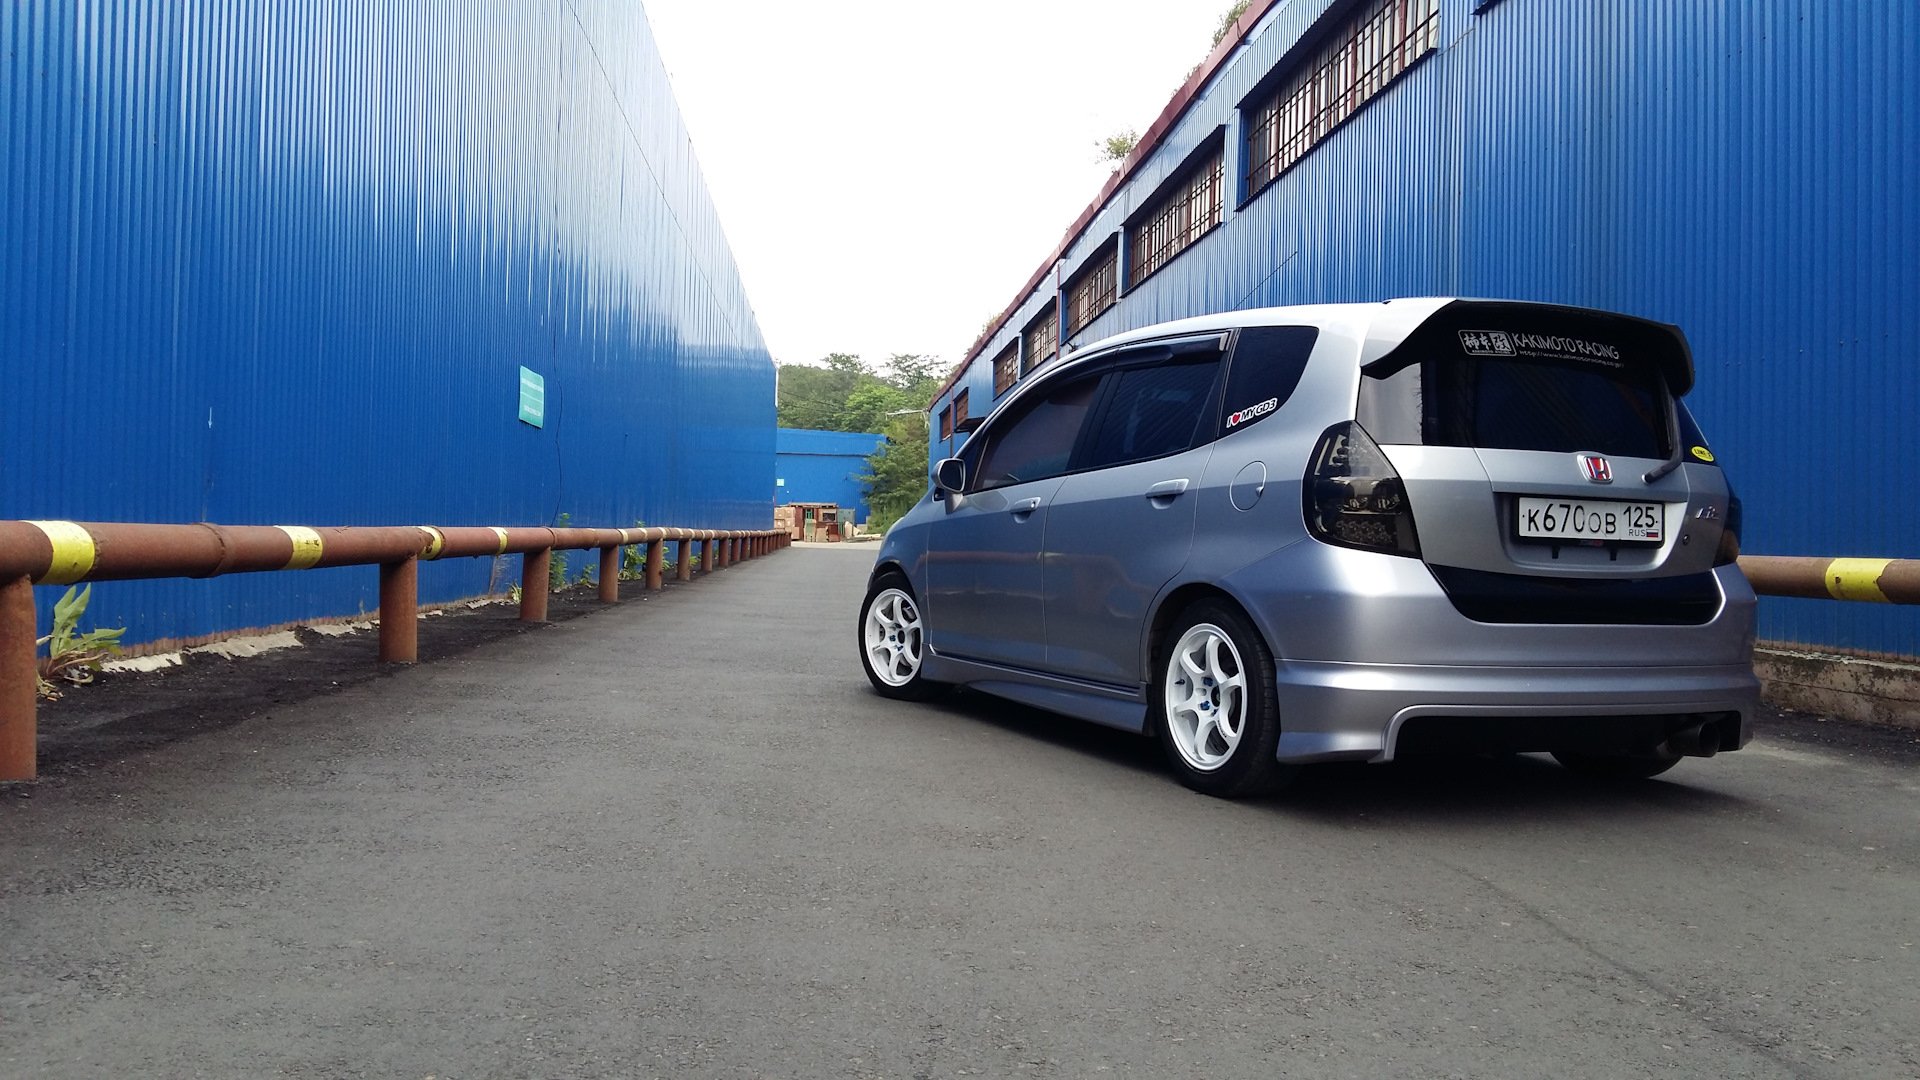 Fitter first. Honda Fit gd1 Tuning. Honda Fit 2004 Tuning. Honda Fit 2015 Tuning. Honda Fit 2 Tuning.